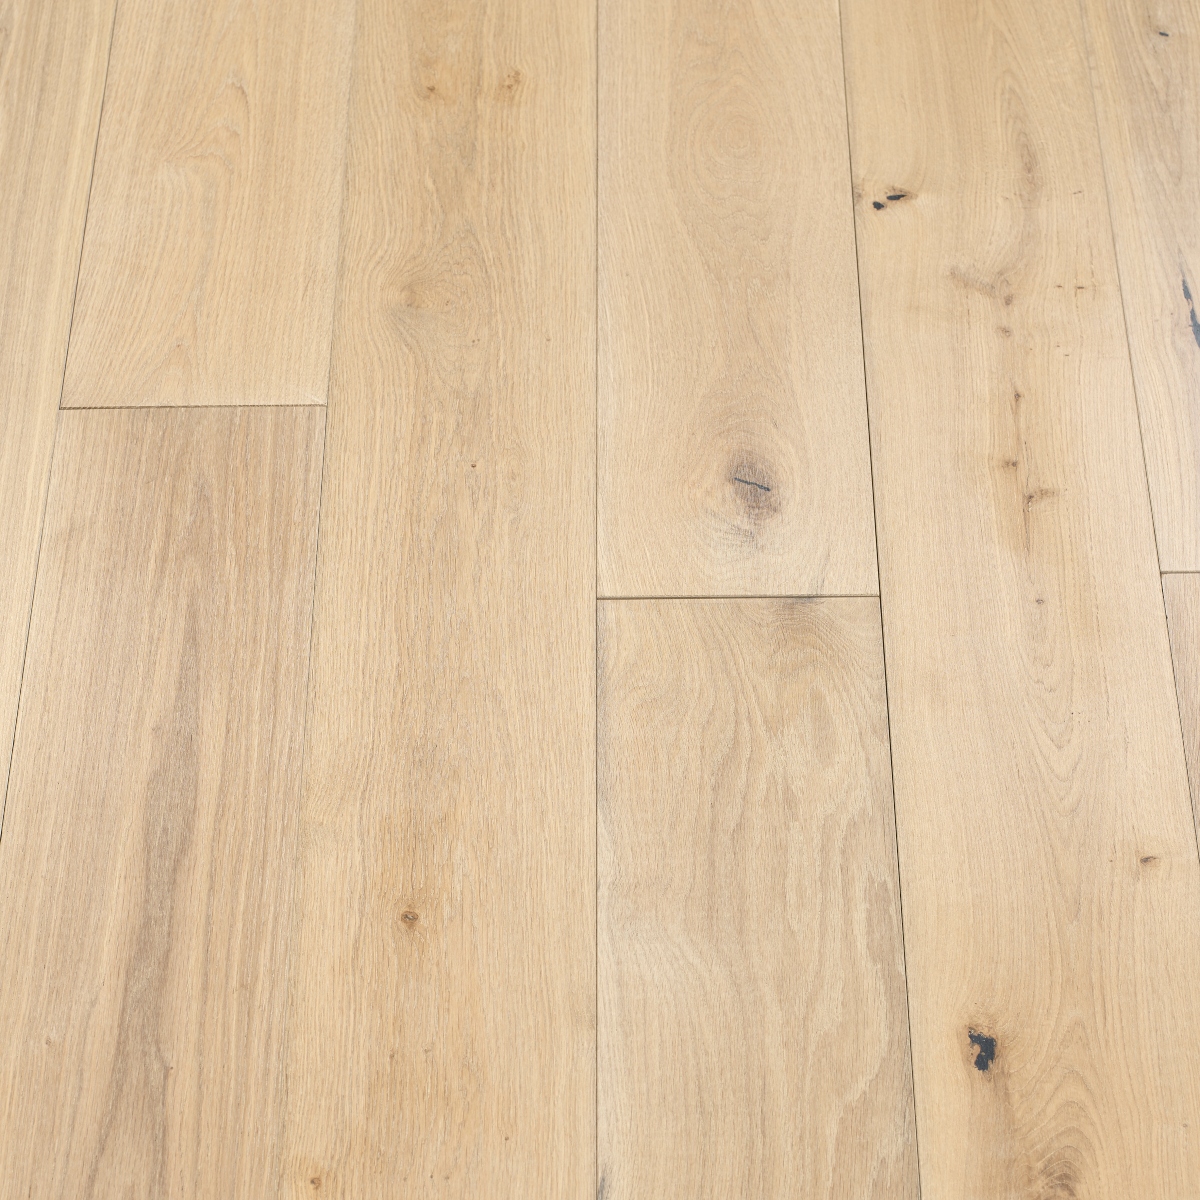 Classic Satin Woodflooring - image featuring a woodflooring with a satin finish, offering a timeless look.